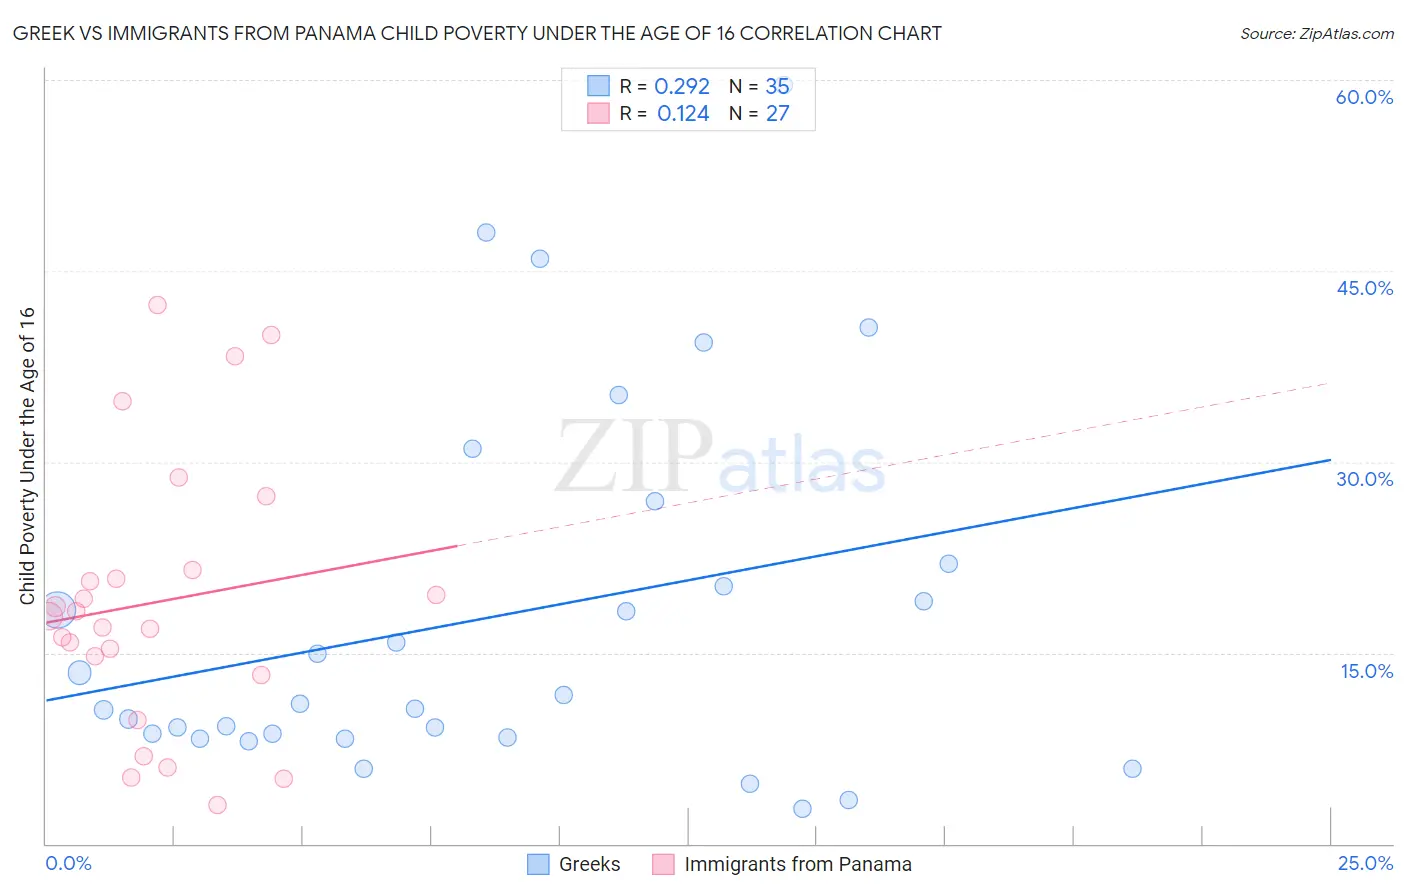 Greek vs Immigrants from Panama Child Poverty Under the Age of 16